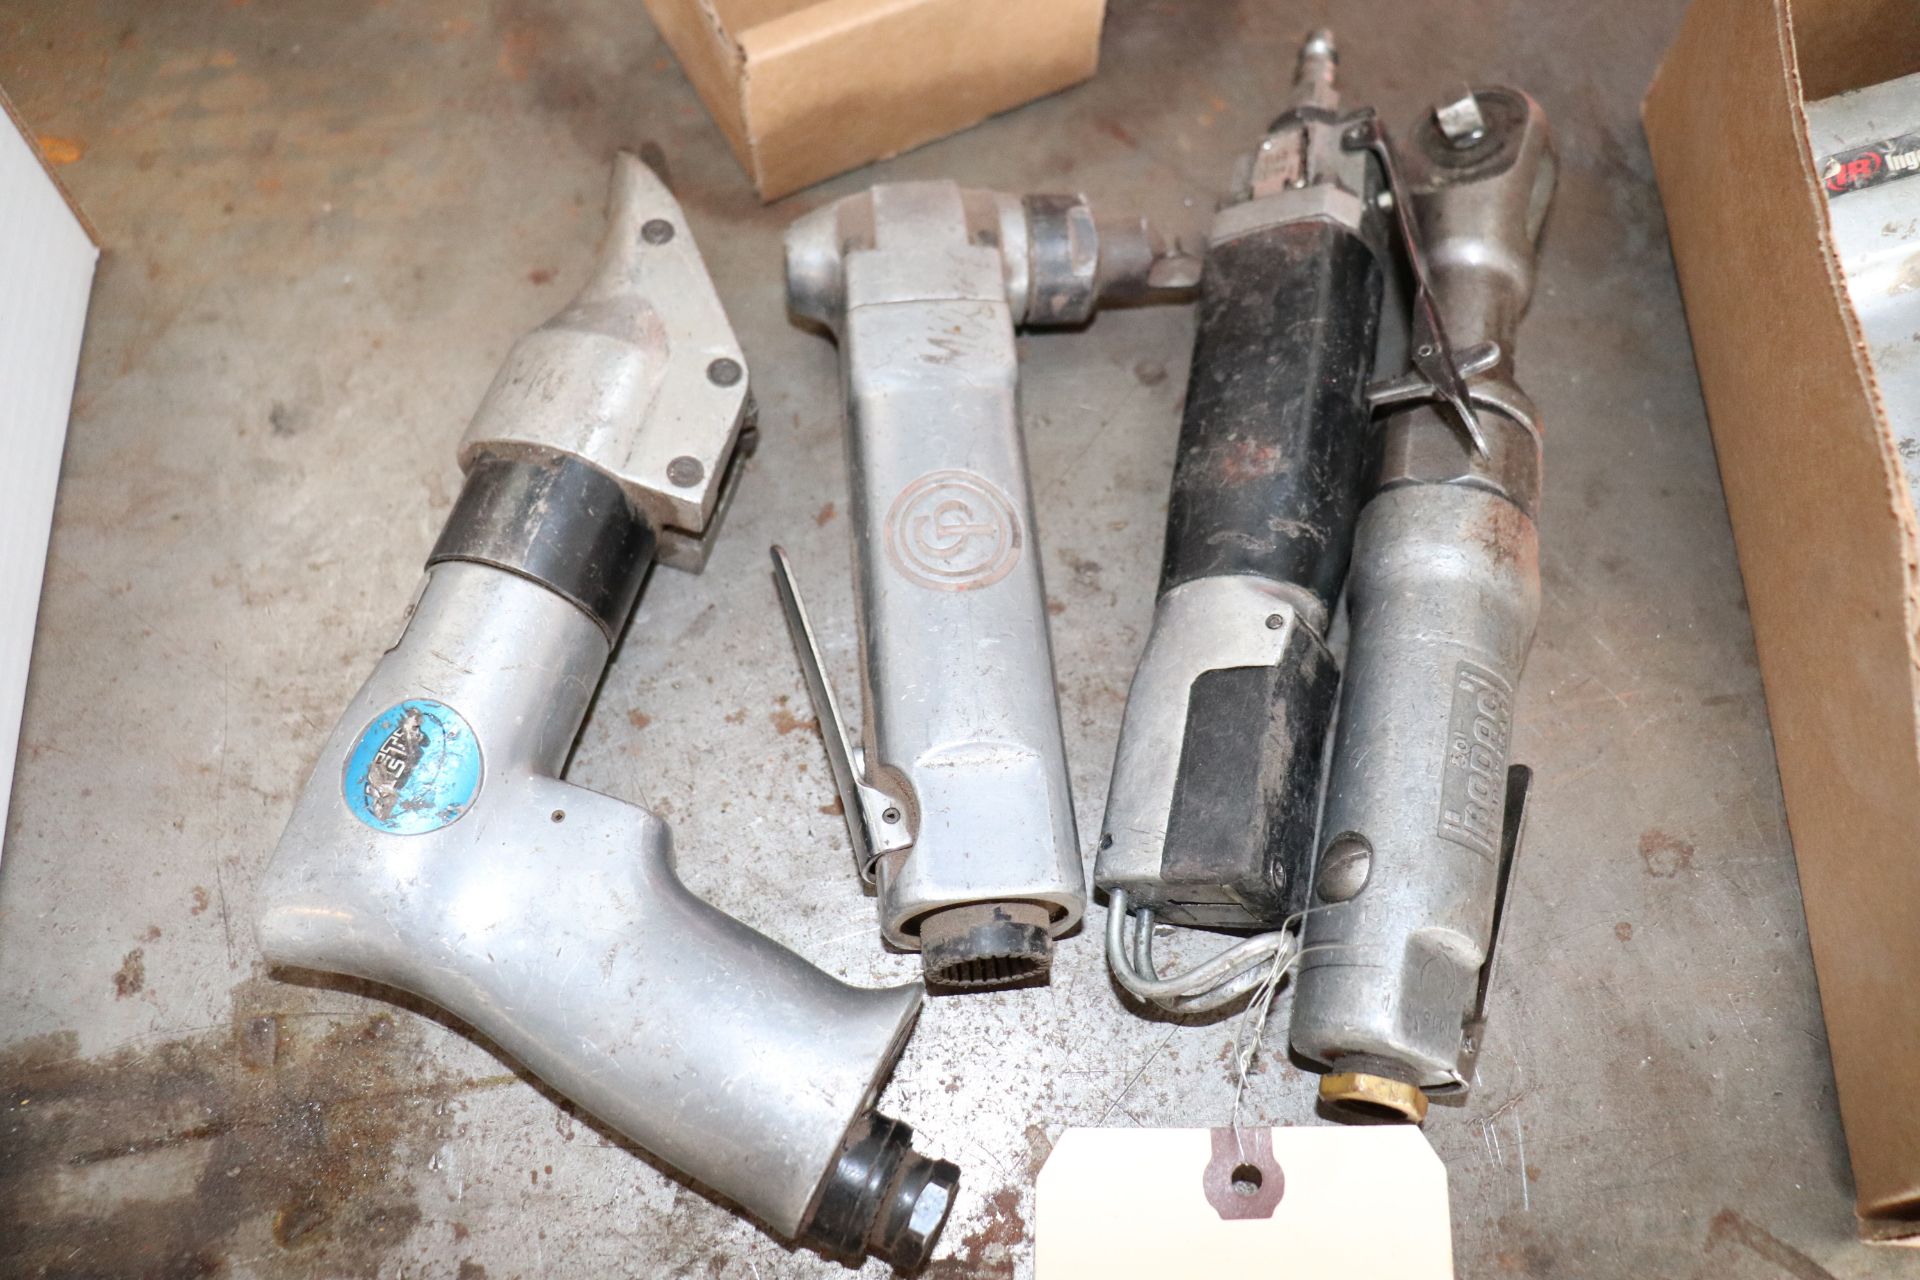 Group of pneumatic nibblers, saw and wrench